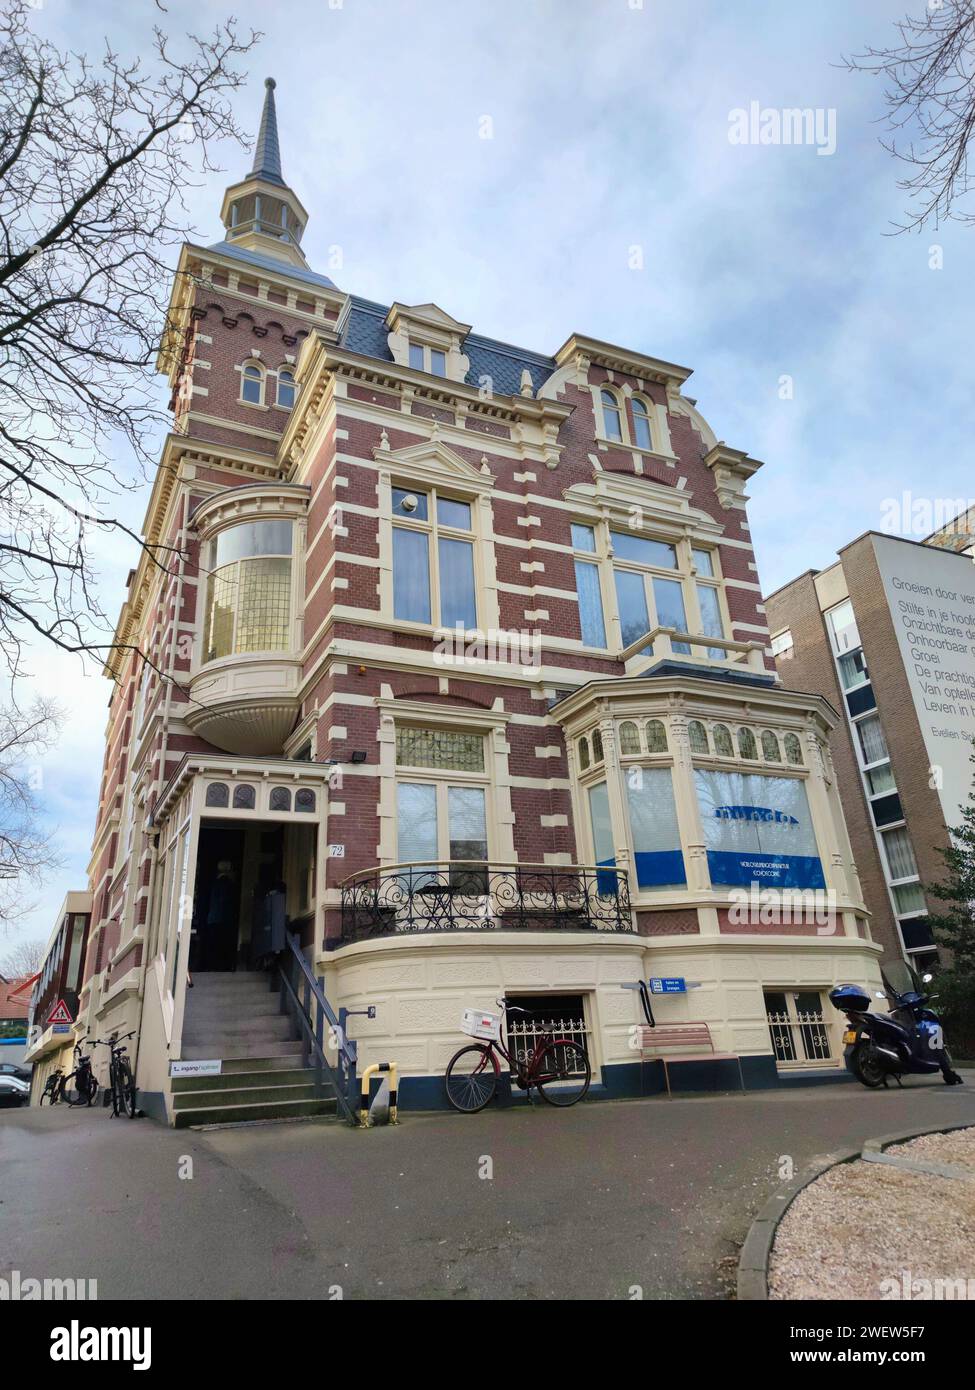 Beautiful ancient stately building at Scheveningse Weg between the village of Scheveningen and the city of The Hague, Netherlands. Stock Photo